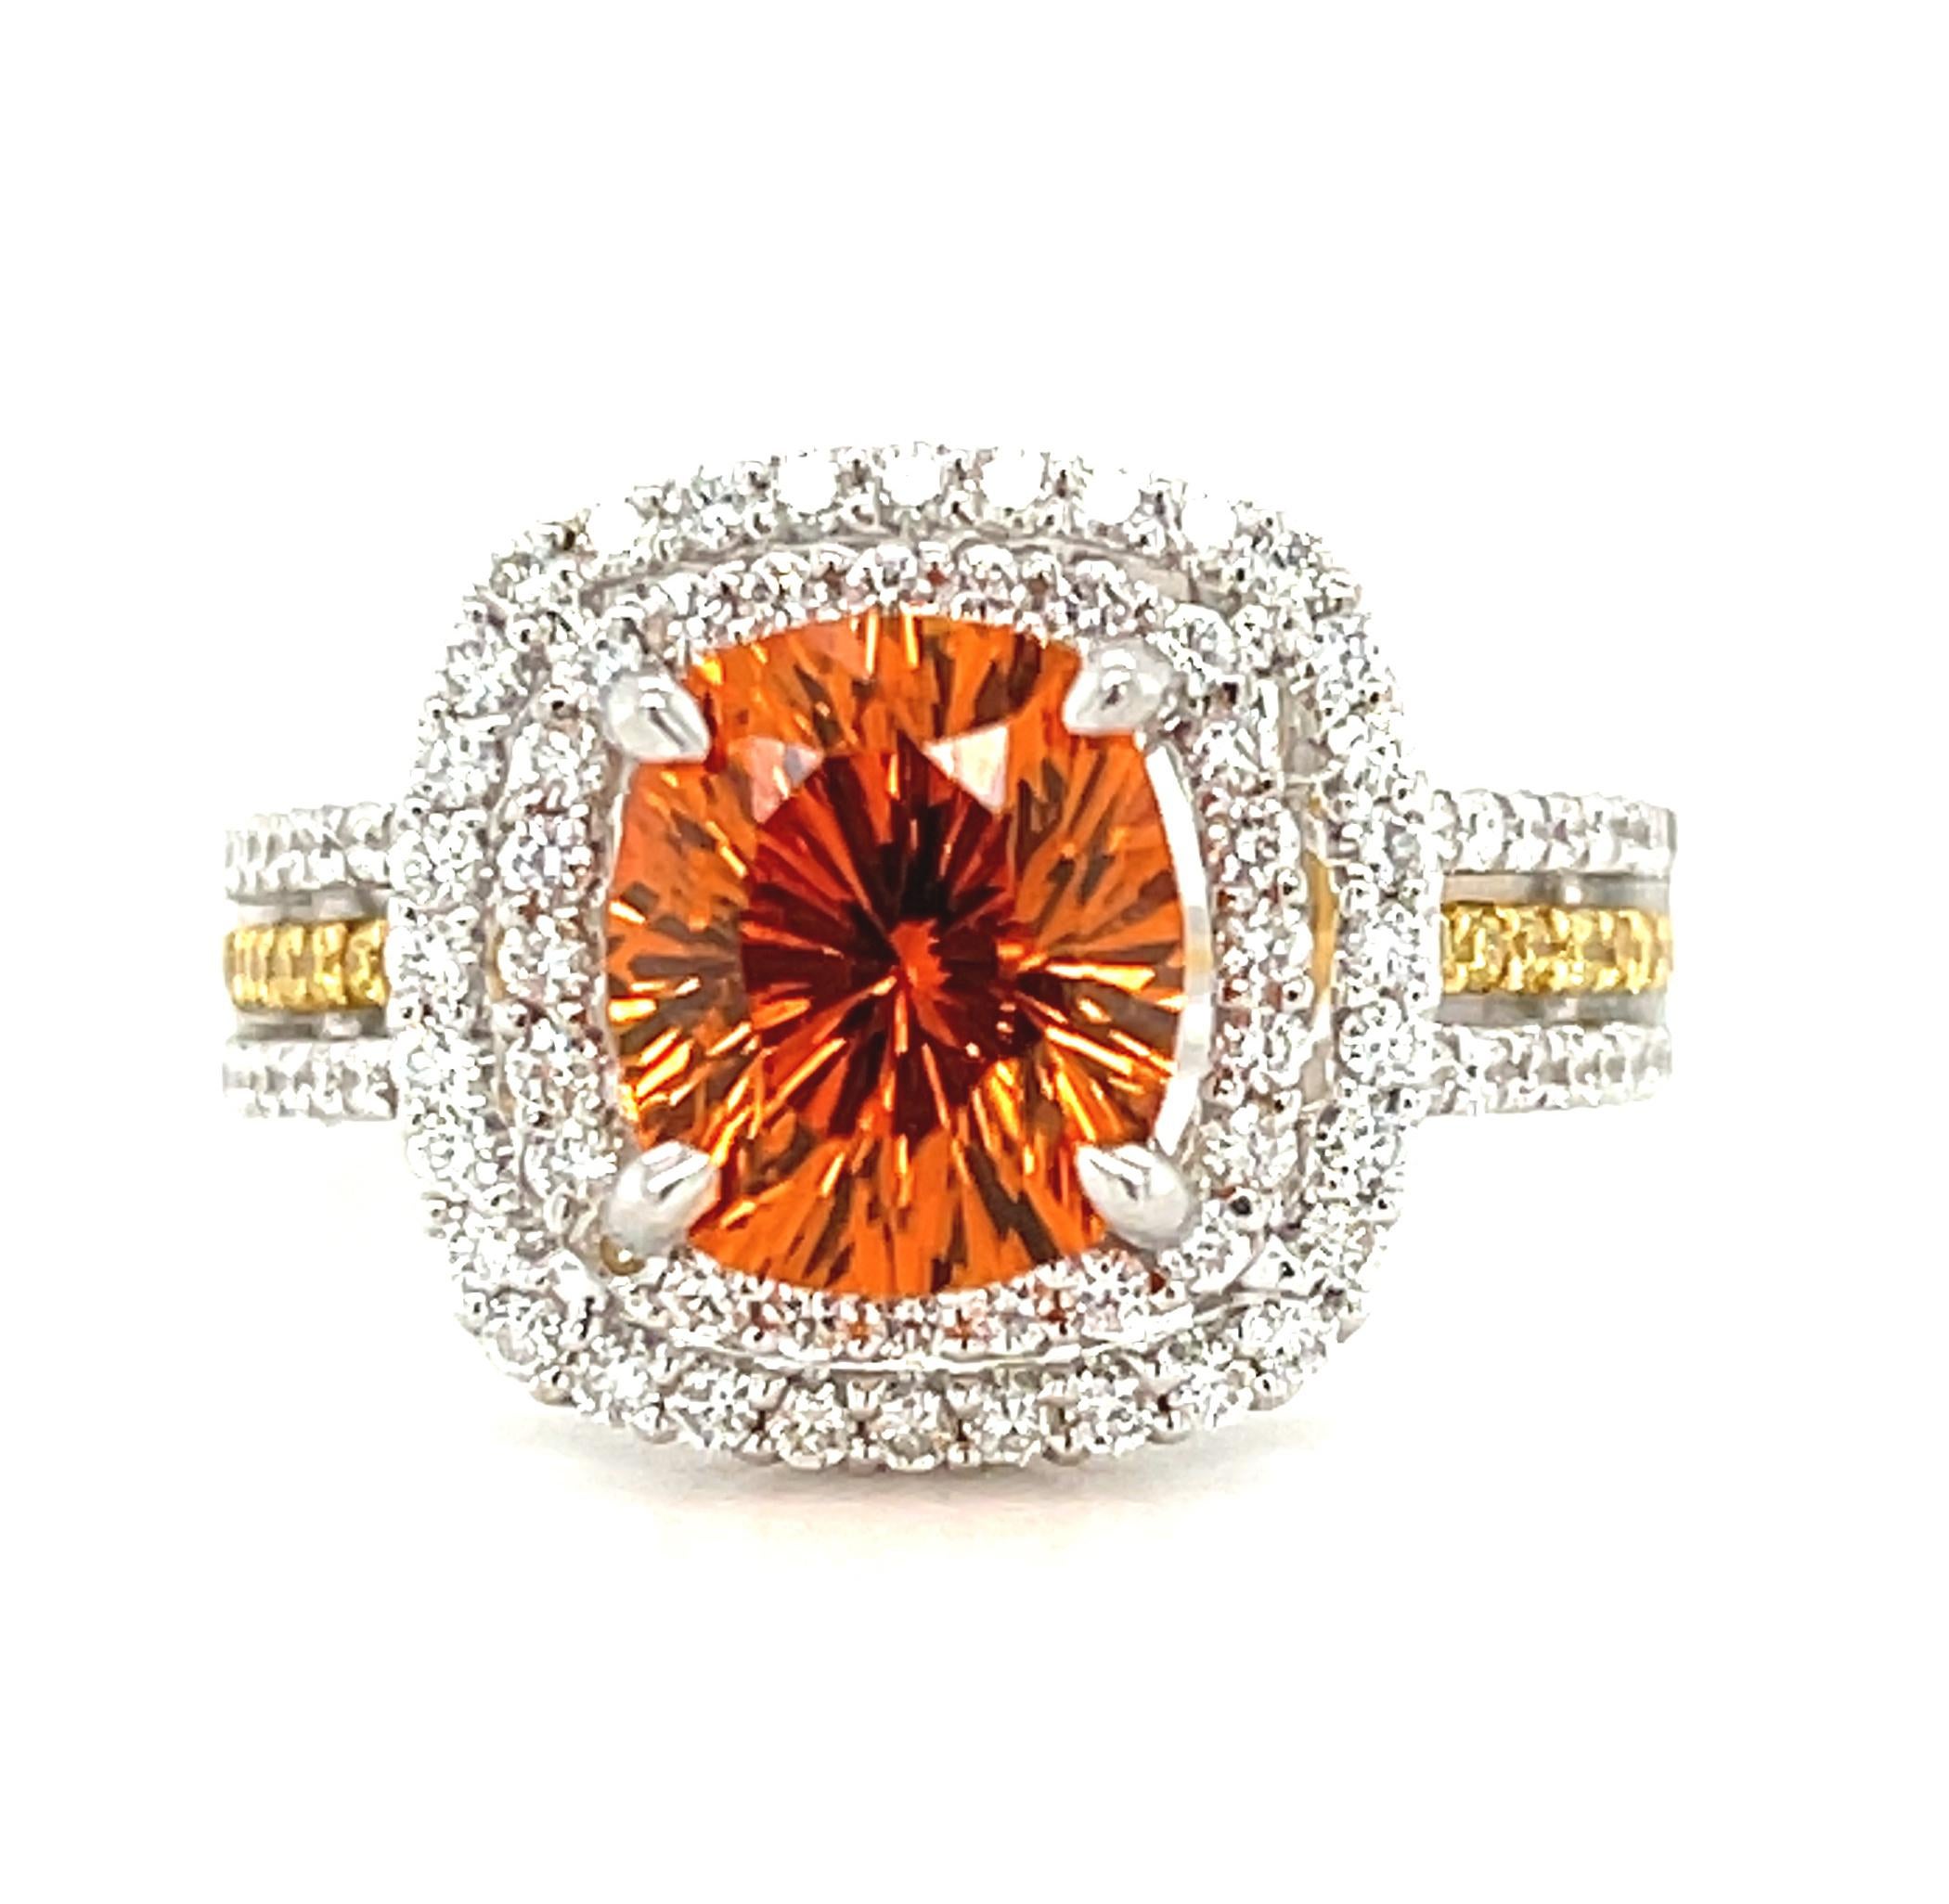 This sparkling cocktail ring features a gorgeous cushion shaped, orange spessartite garnet with spectacular brilliance and life! Weighing 2.99 carats, this top quality, unusual gem has been faceted with a fancy starburst pavilion (or bottom), giving